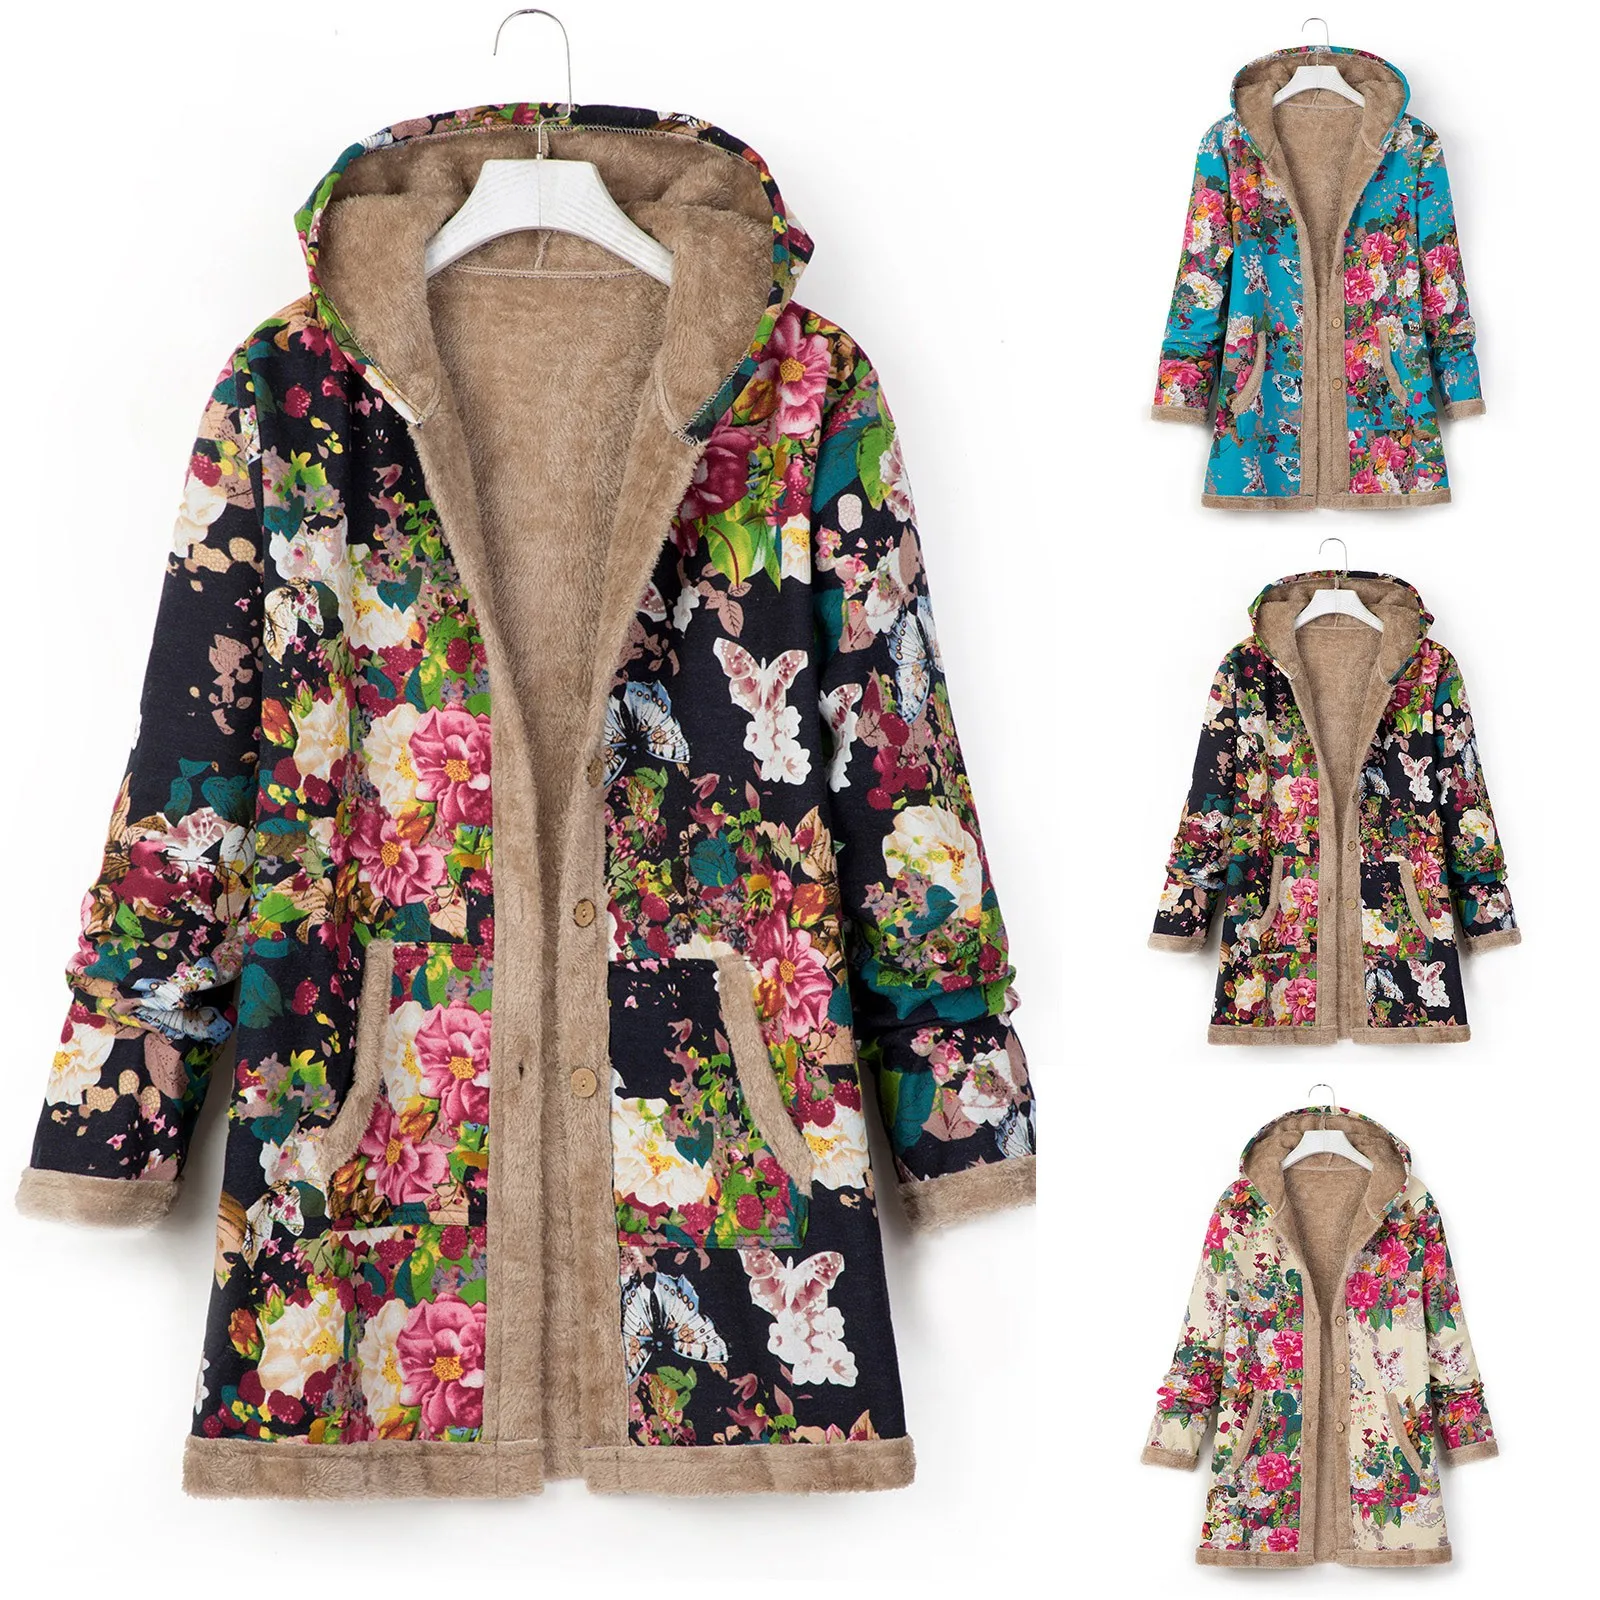 NEW Women Vintage Loose Hooded Coat Floral Printed Fleeces Lining Buttoned big Size Winter Warm Parka Casual Outerwear